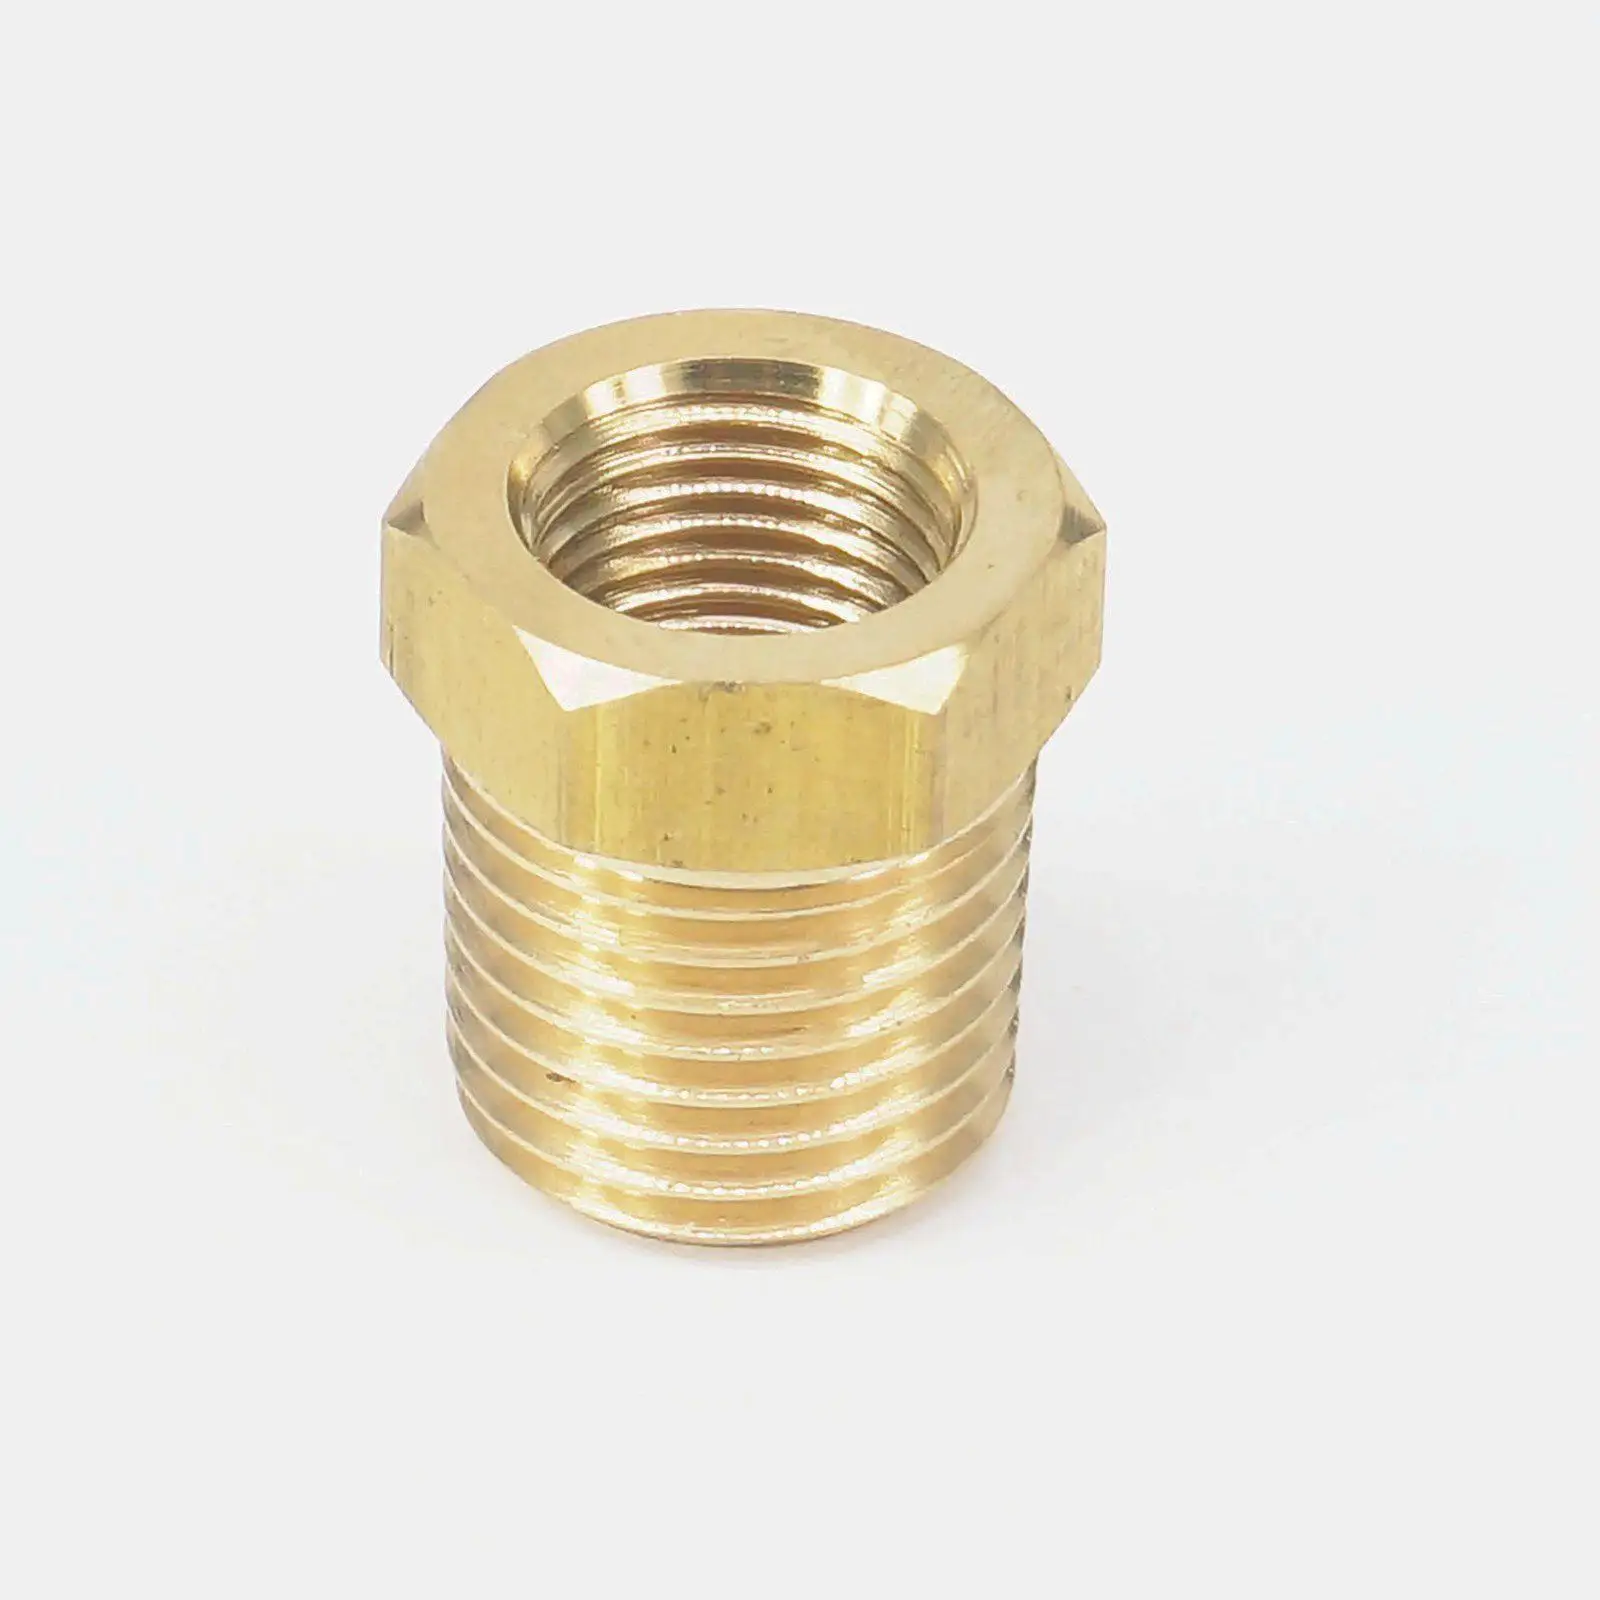 1/4 x 1/8 NPT Female Tee Brass Pipe Fitting Fuel Air Water Oil Gas FasParts 